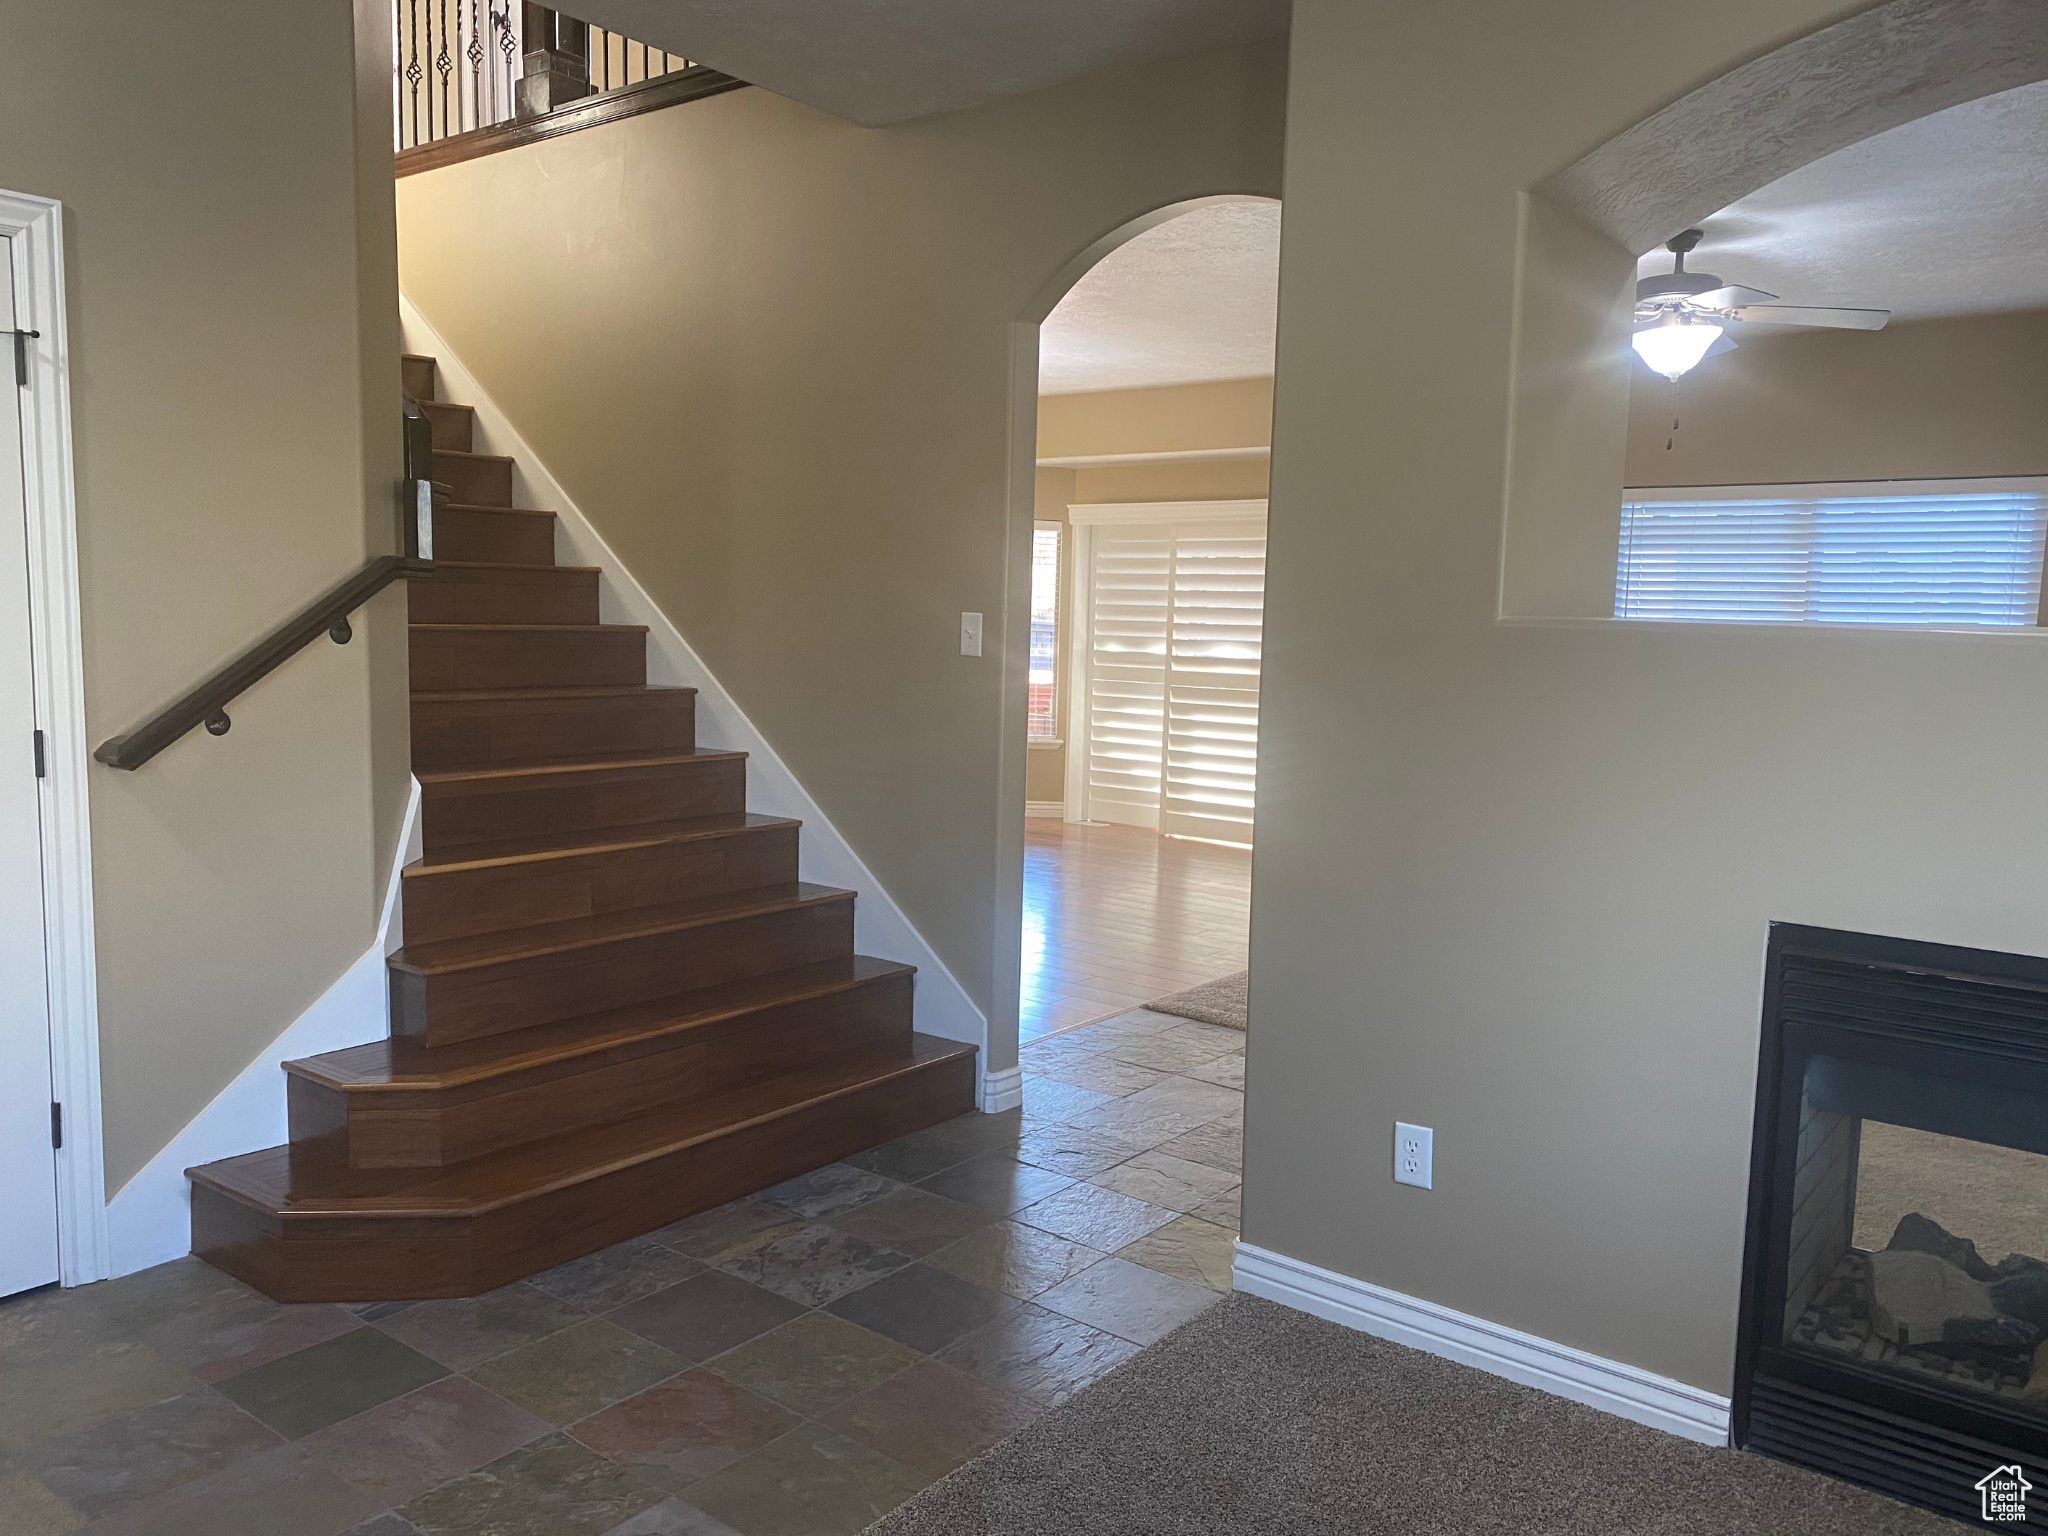 Staircase featuring ceiling fan and dark tile floors